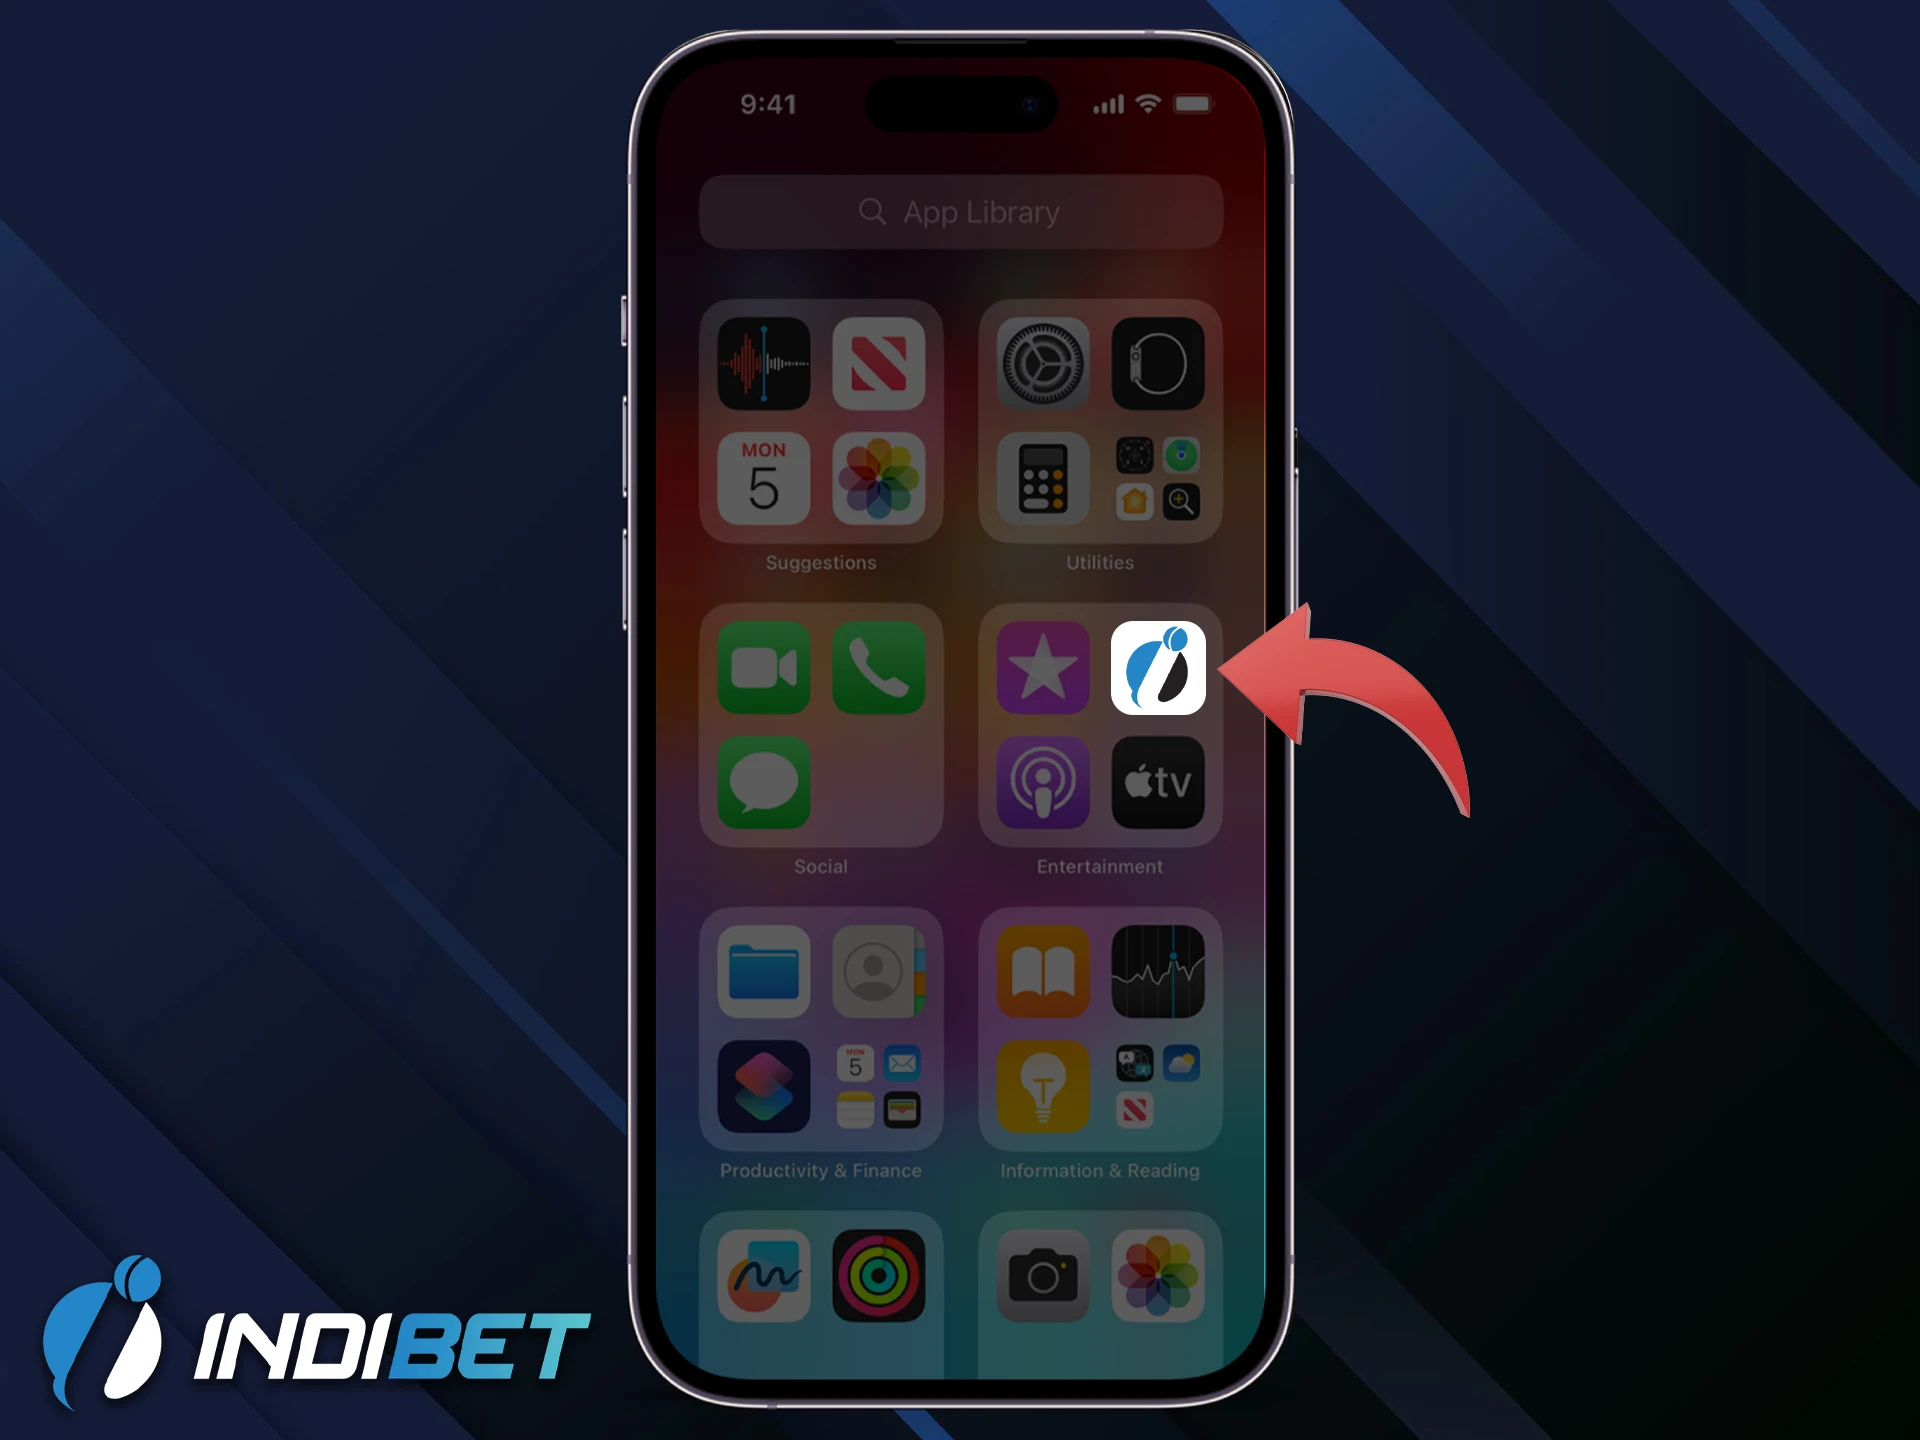 Install the Indibet app for iOS in one click.